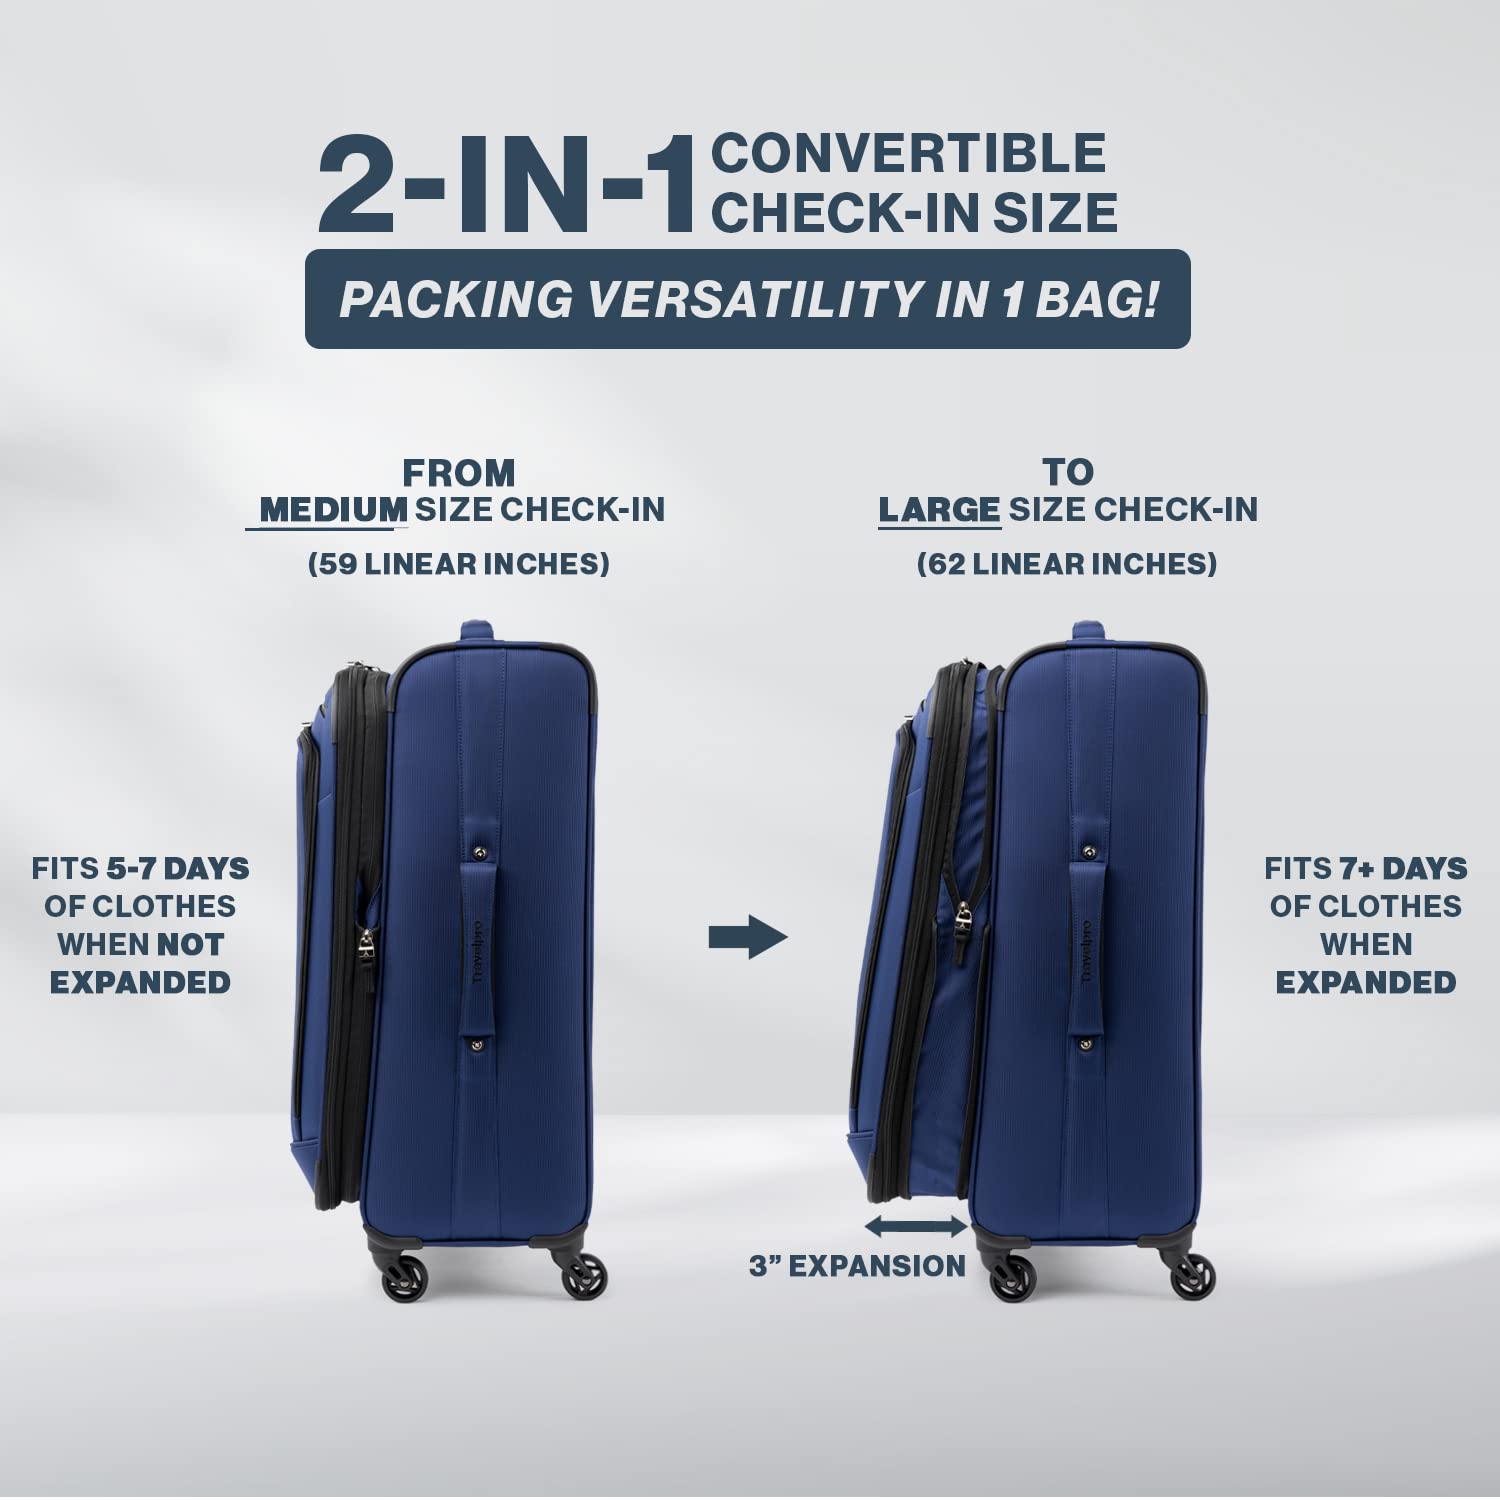 Travelpro Runway 2 Piece Luggage Set, Carry-on & Convertible Medium to Large Check-in Expandable Luggage, 4 Spinner Wheels, Softside Suitcase, Men and Women, Blue